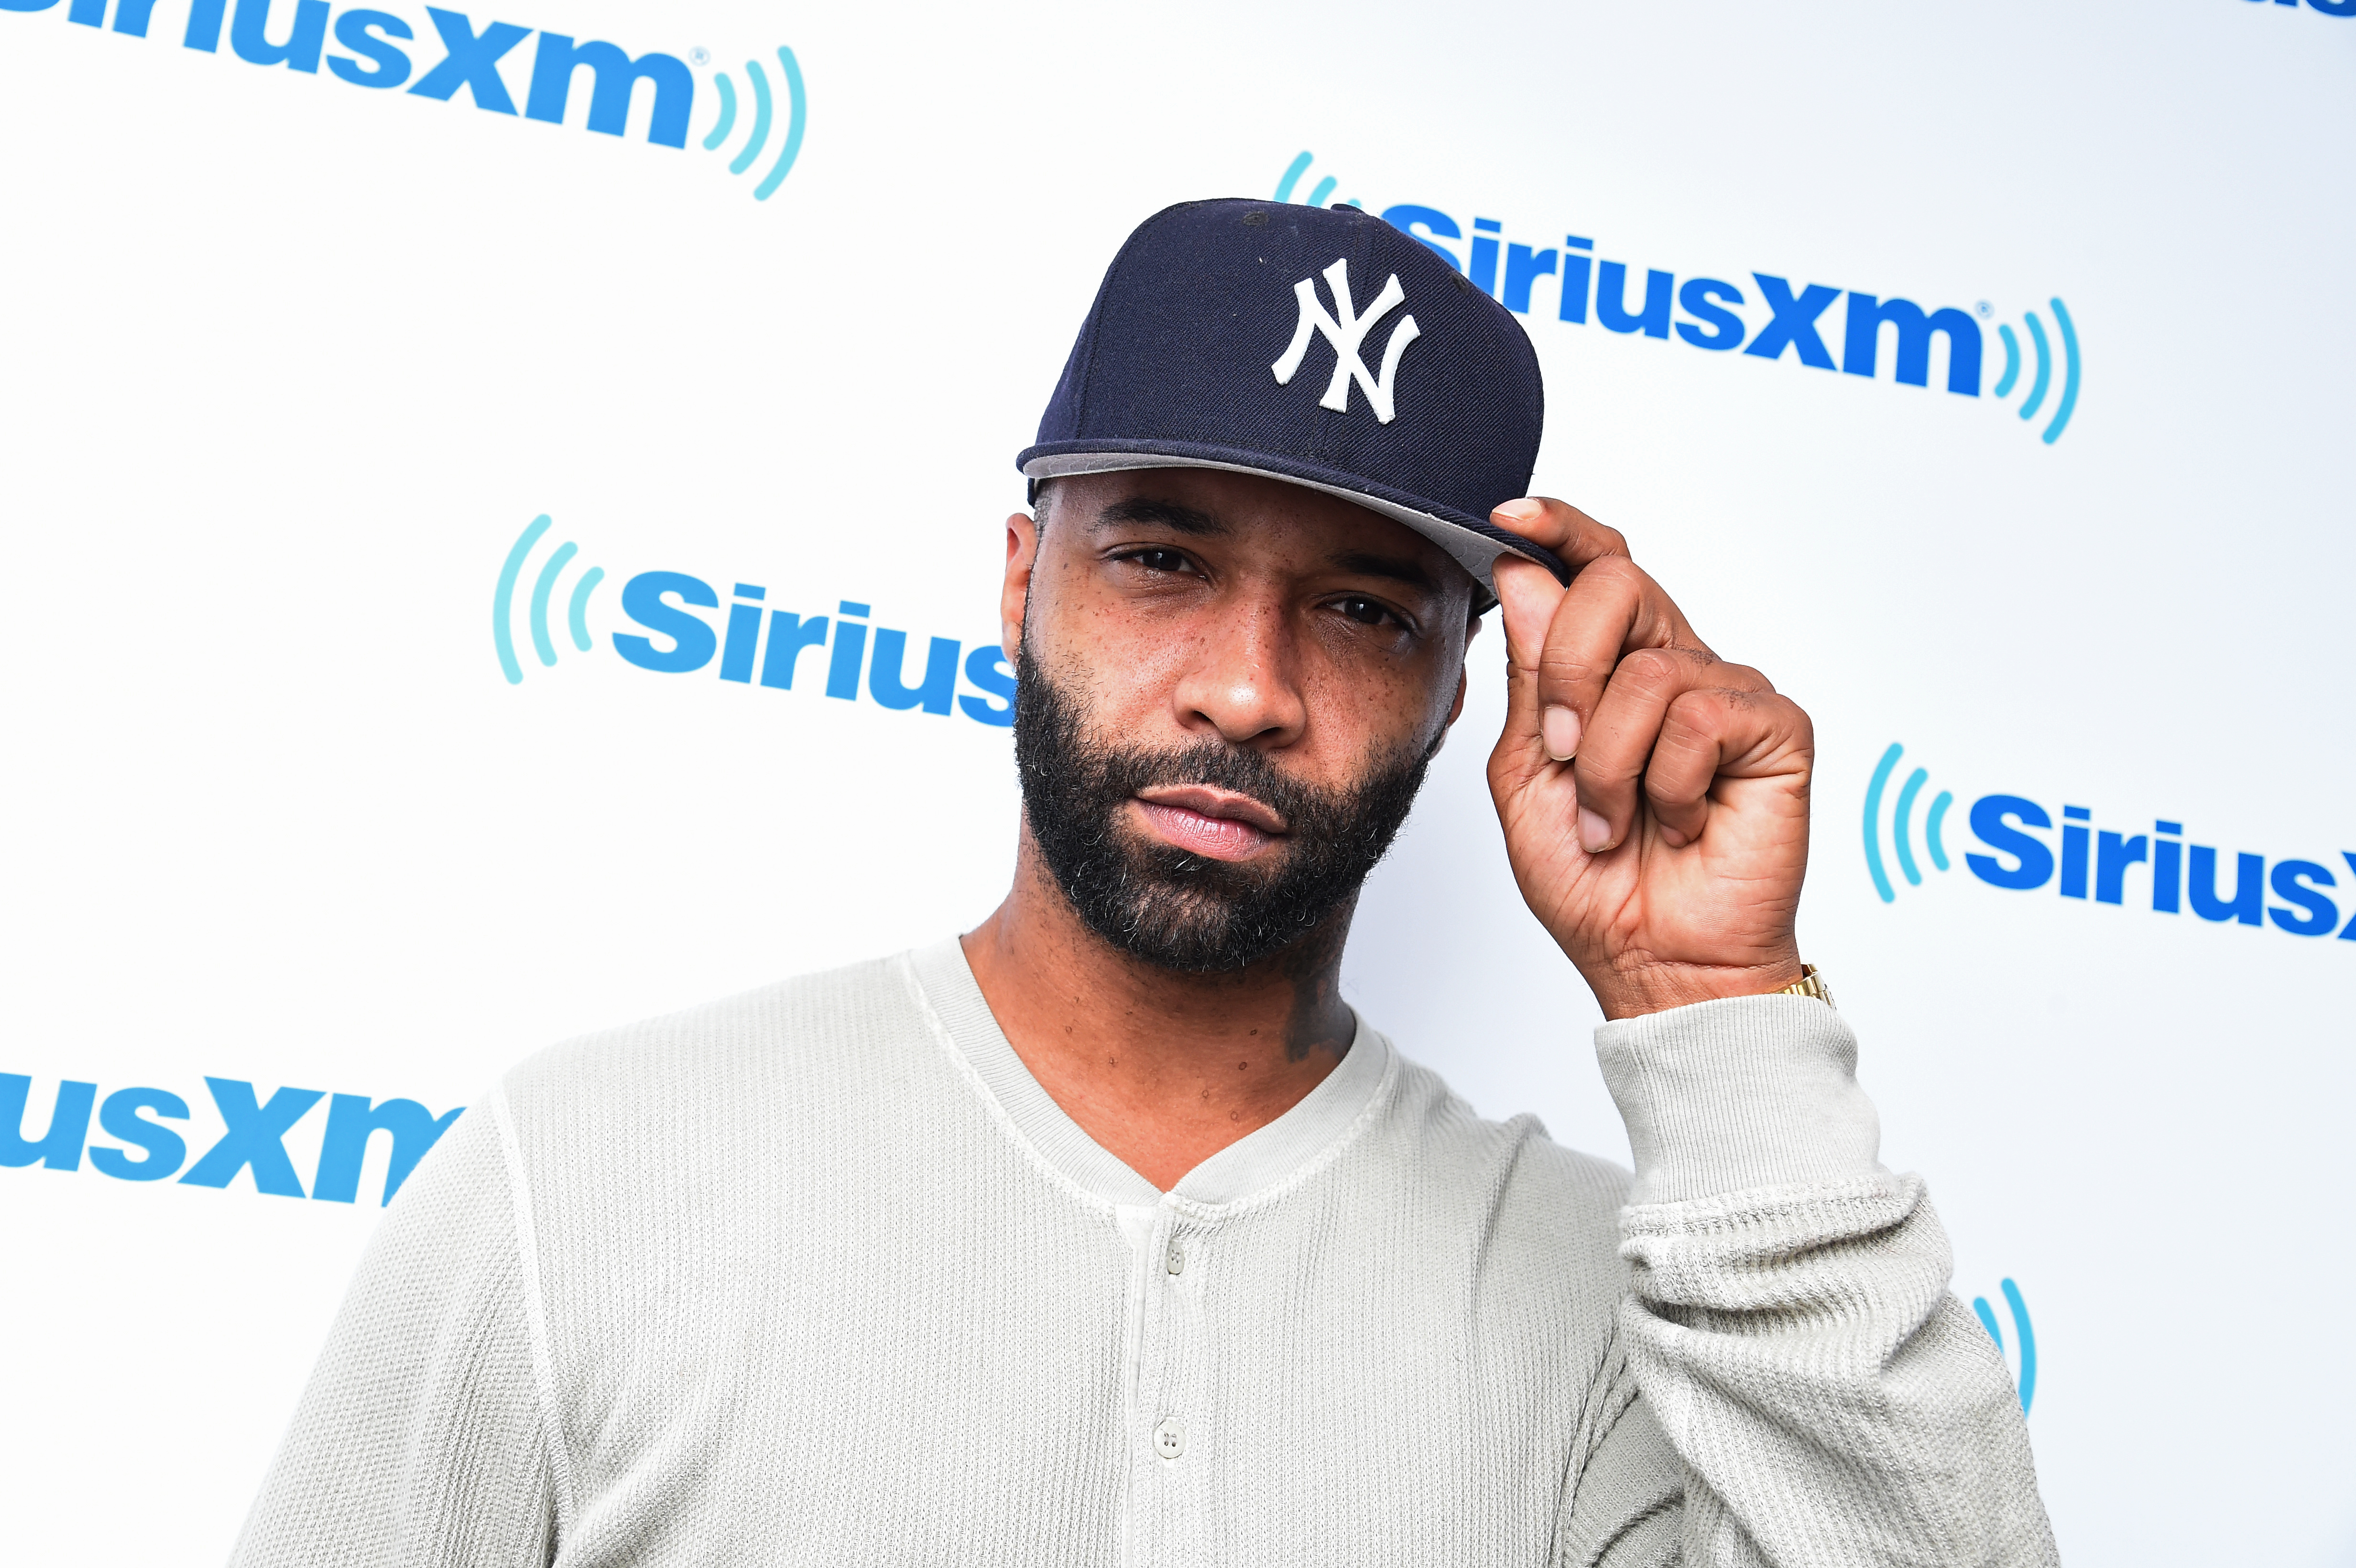 Joe Budden Questions Gucci Mane's A&R Skills After 1017 Woes